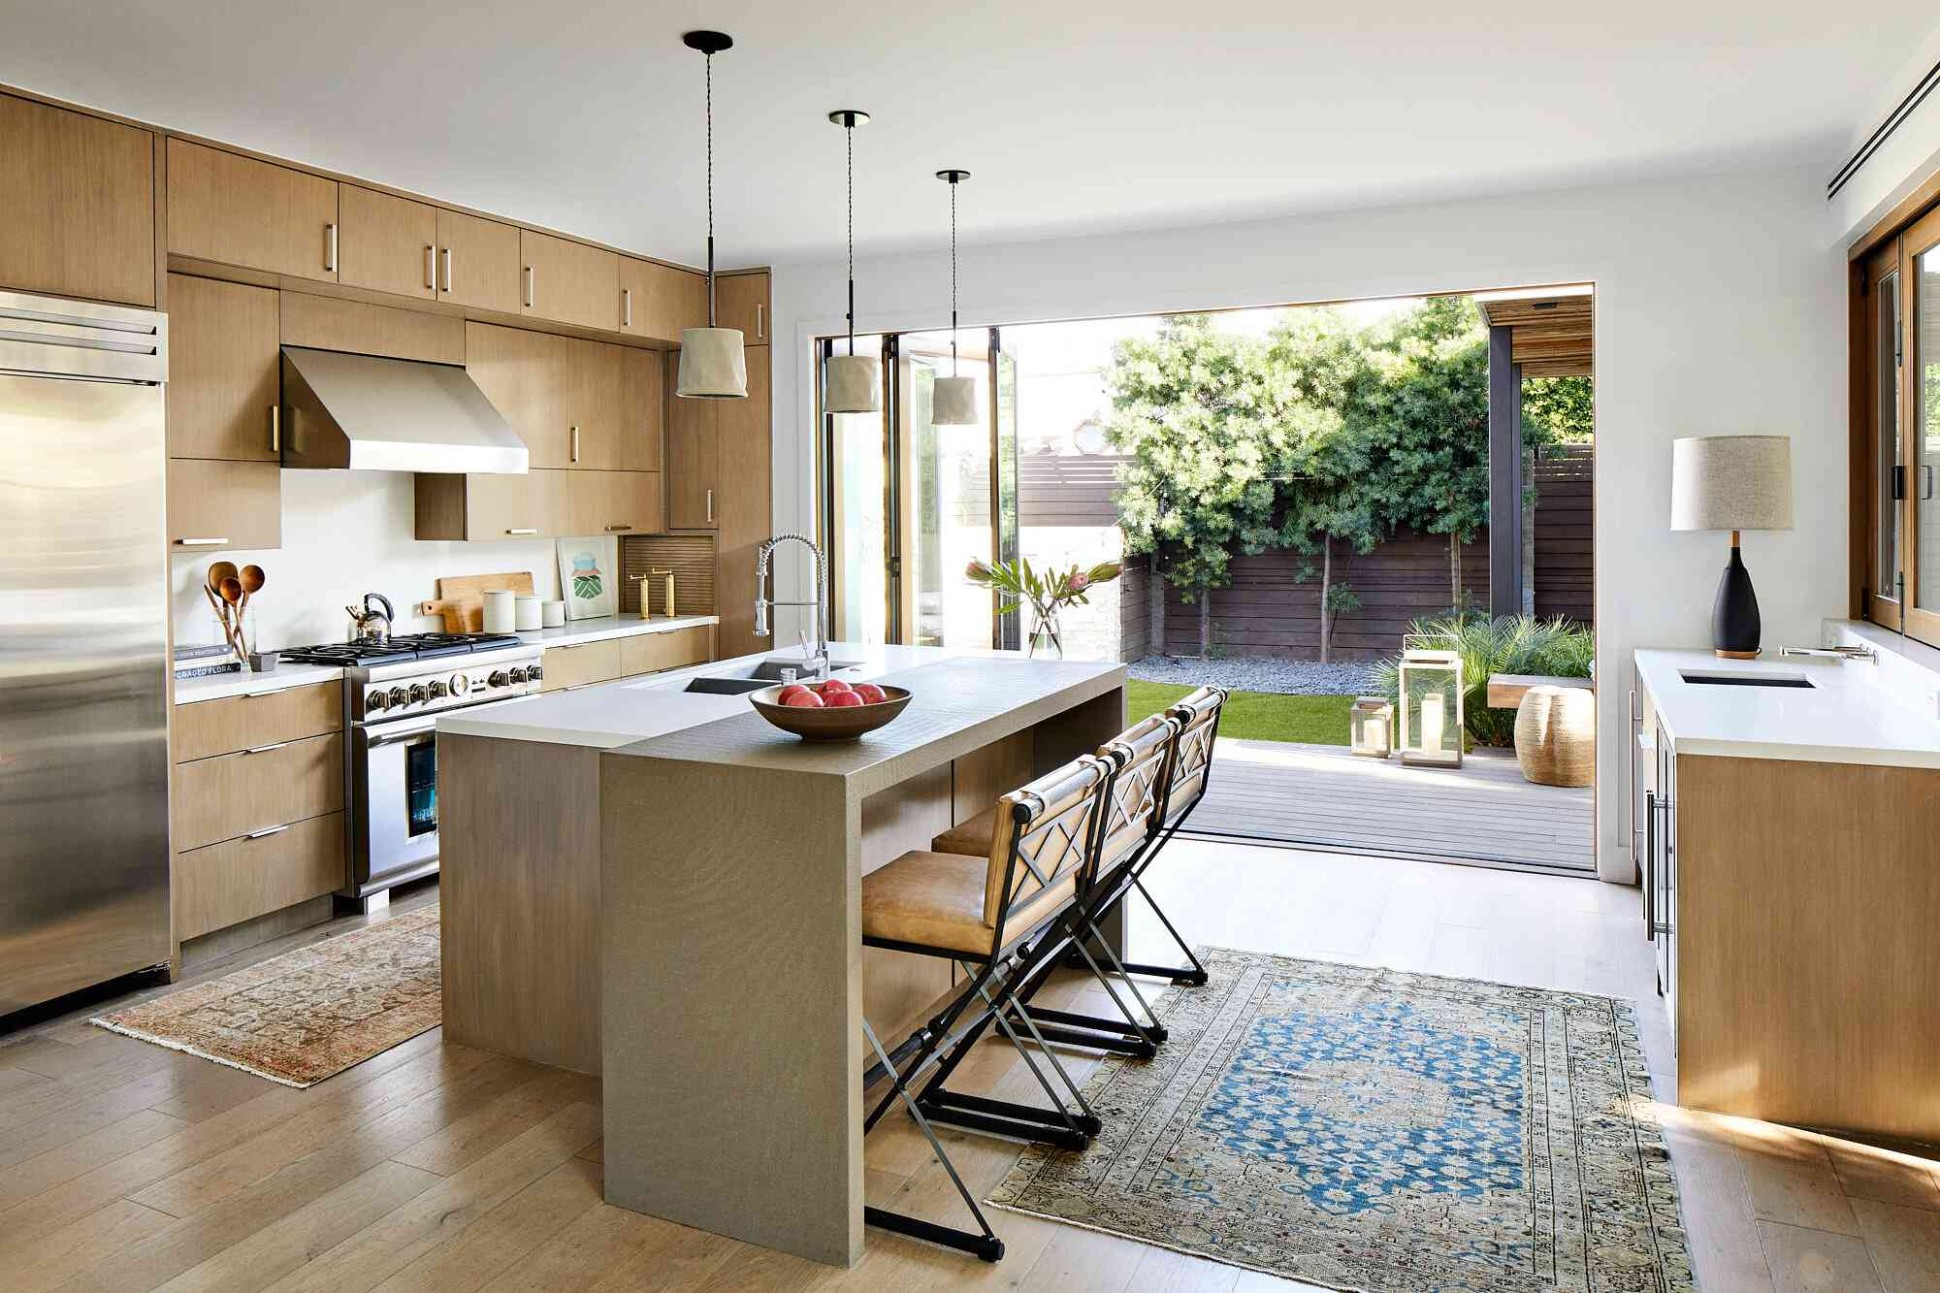 5 Open Kitchen Ideas That Are Spacious and Functional